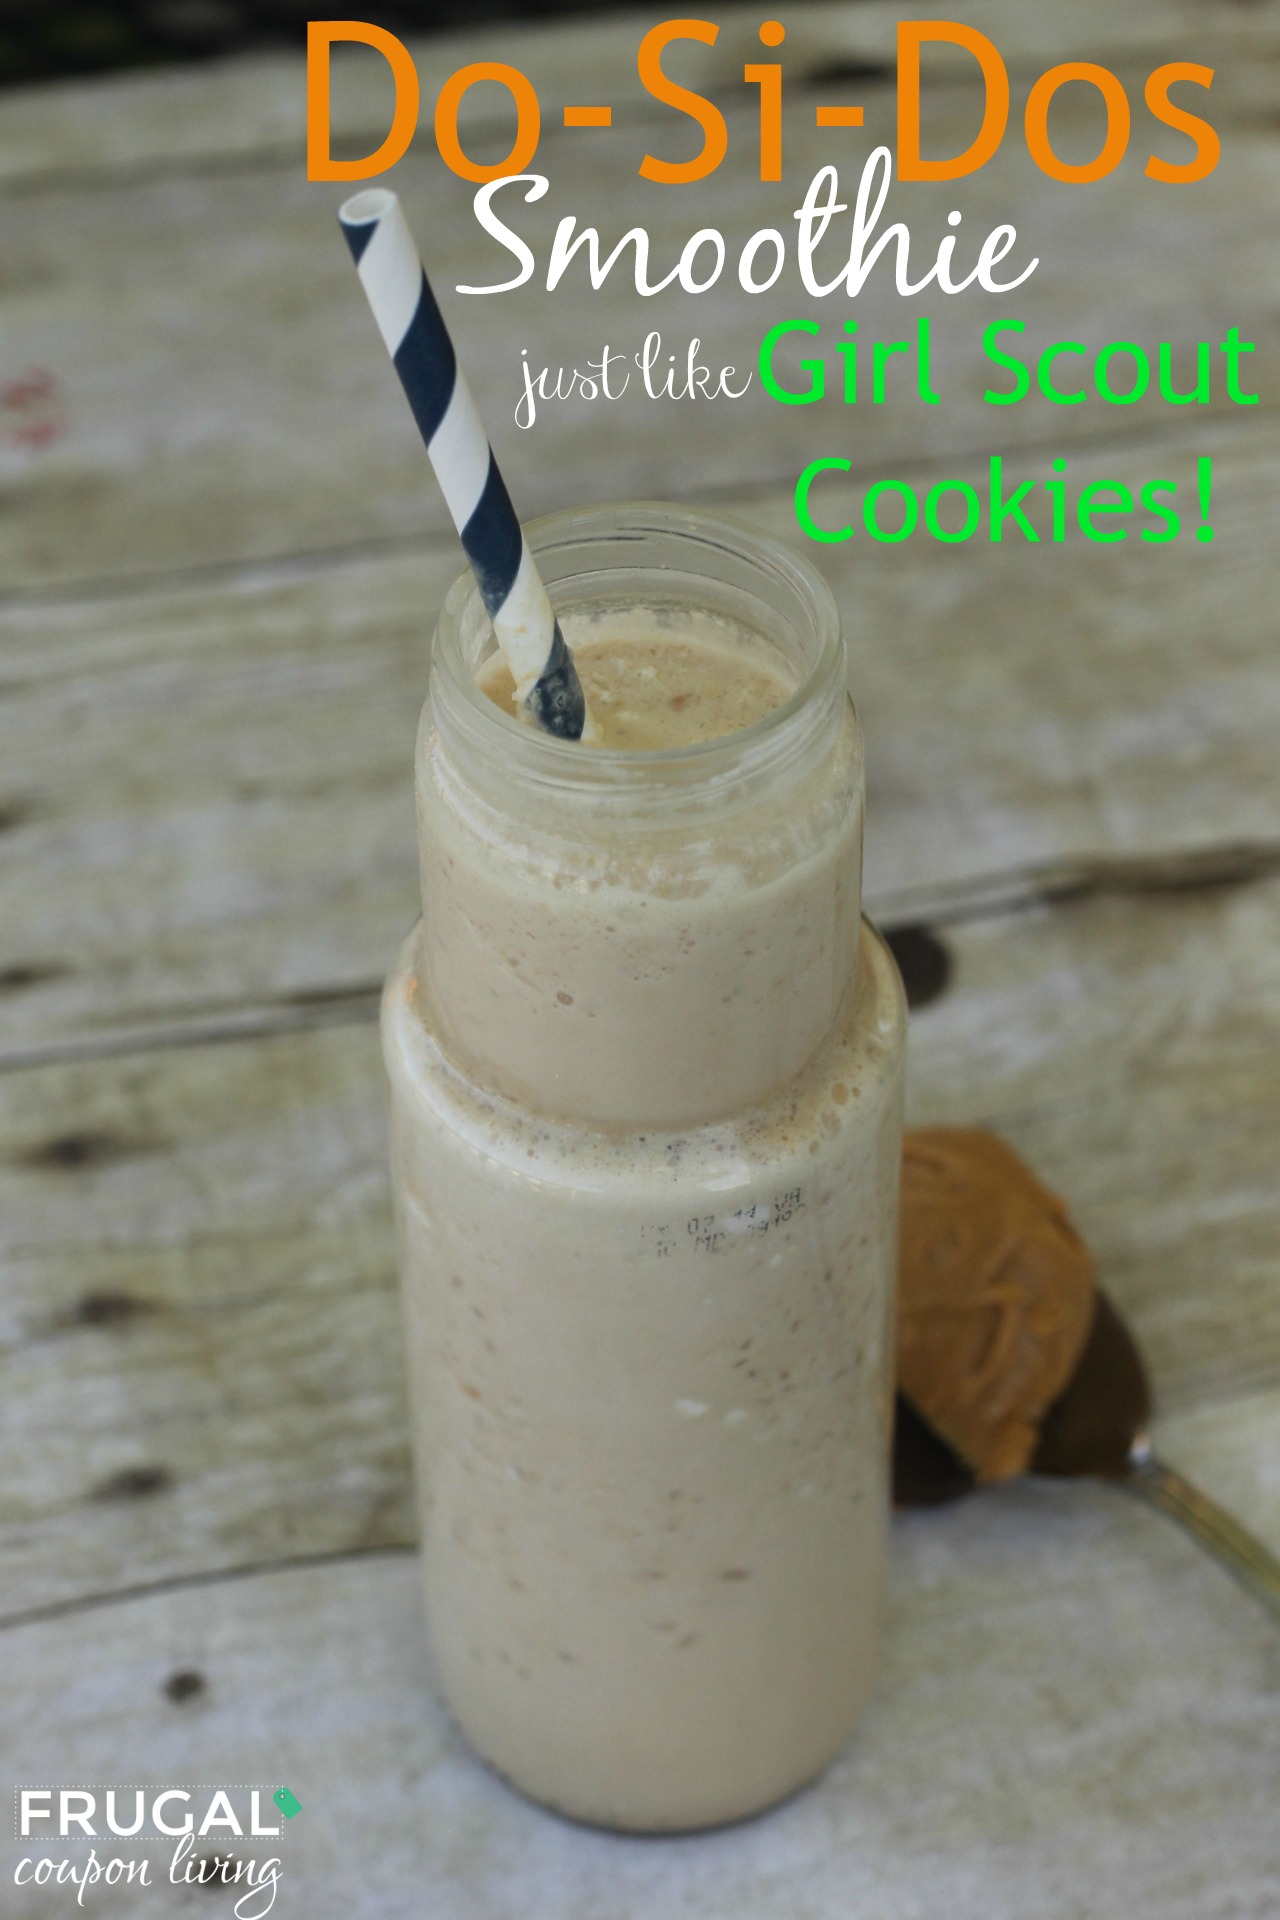 https://www.frugalcouponliving.com/si-dos-smoothie-peanut-butter-protein-packed-drink/do-si-do-smoothie-frugal-coupon-living-juice-plus/